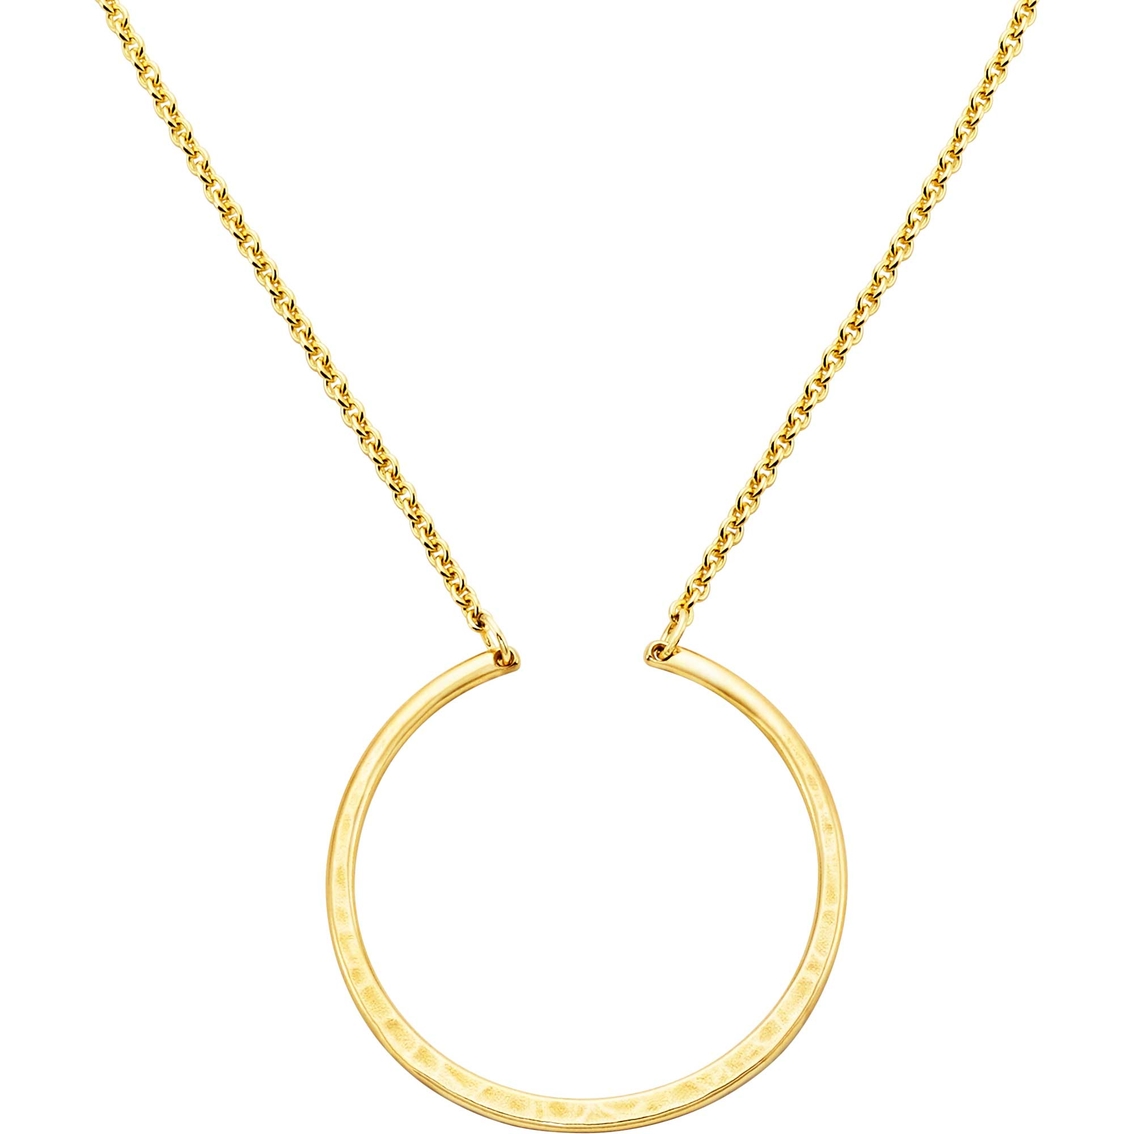 James Avery Hammered Circle Changeable Charm Holder Necklace - 24 in.